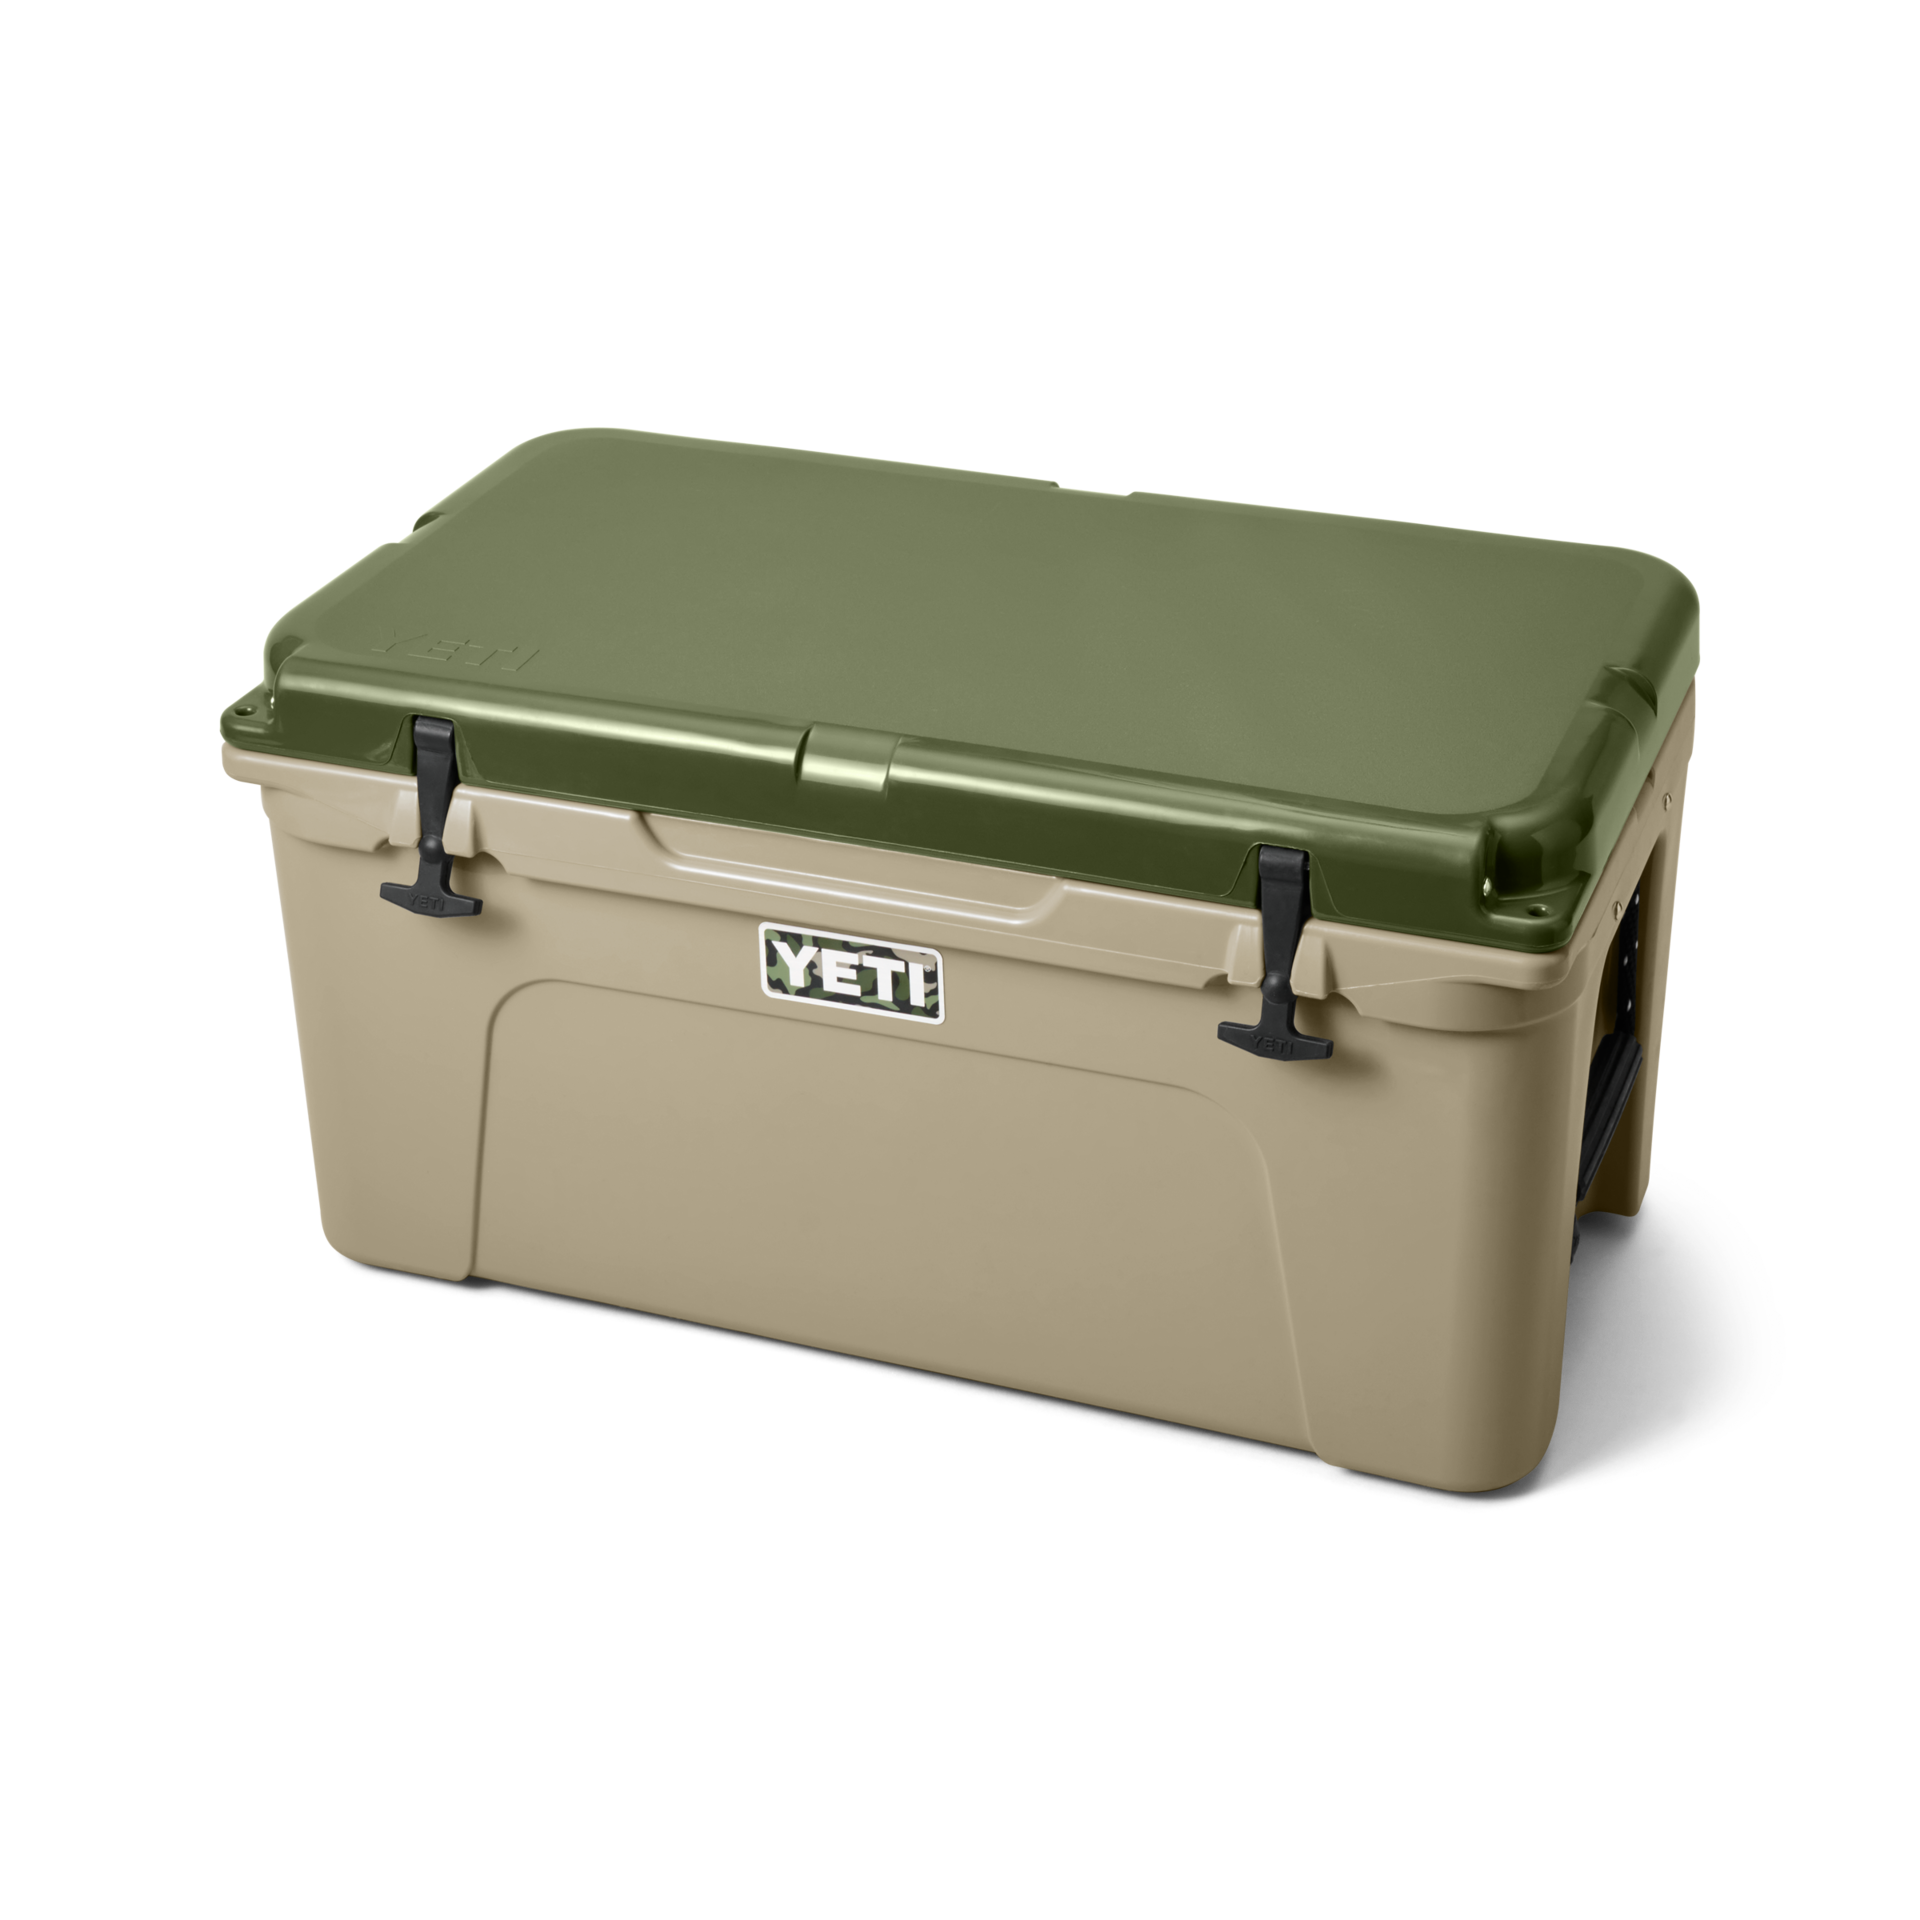 Yeti, Tundra, 65, Cooler, Hard Cooler, Limited, Decoy, Hunting, Camo, Limited Edition